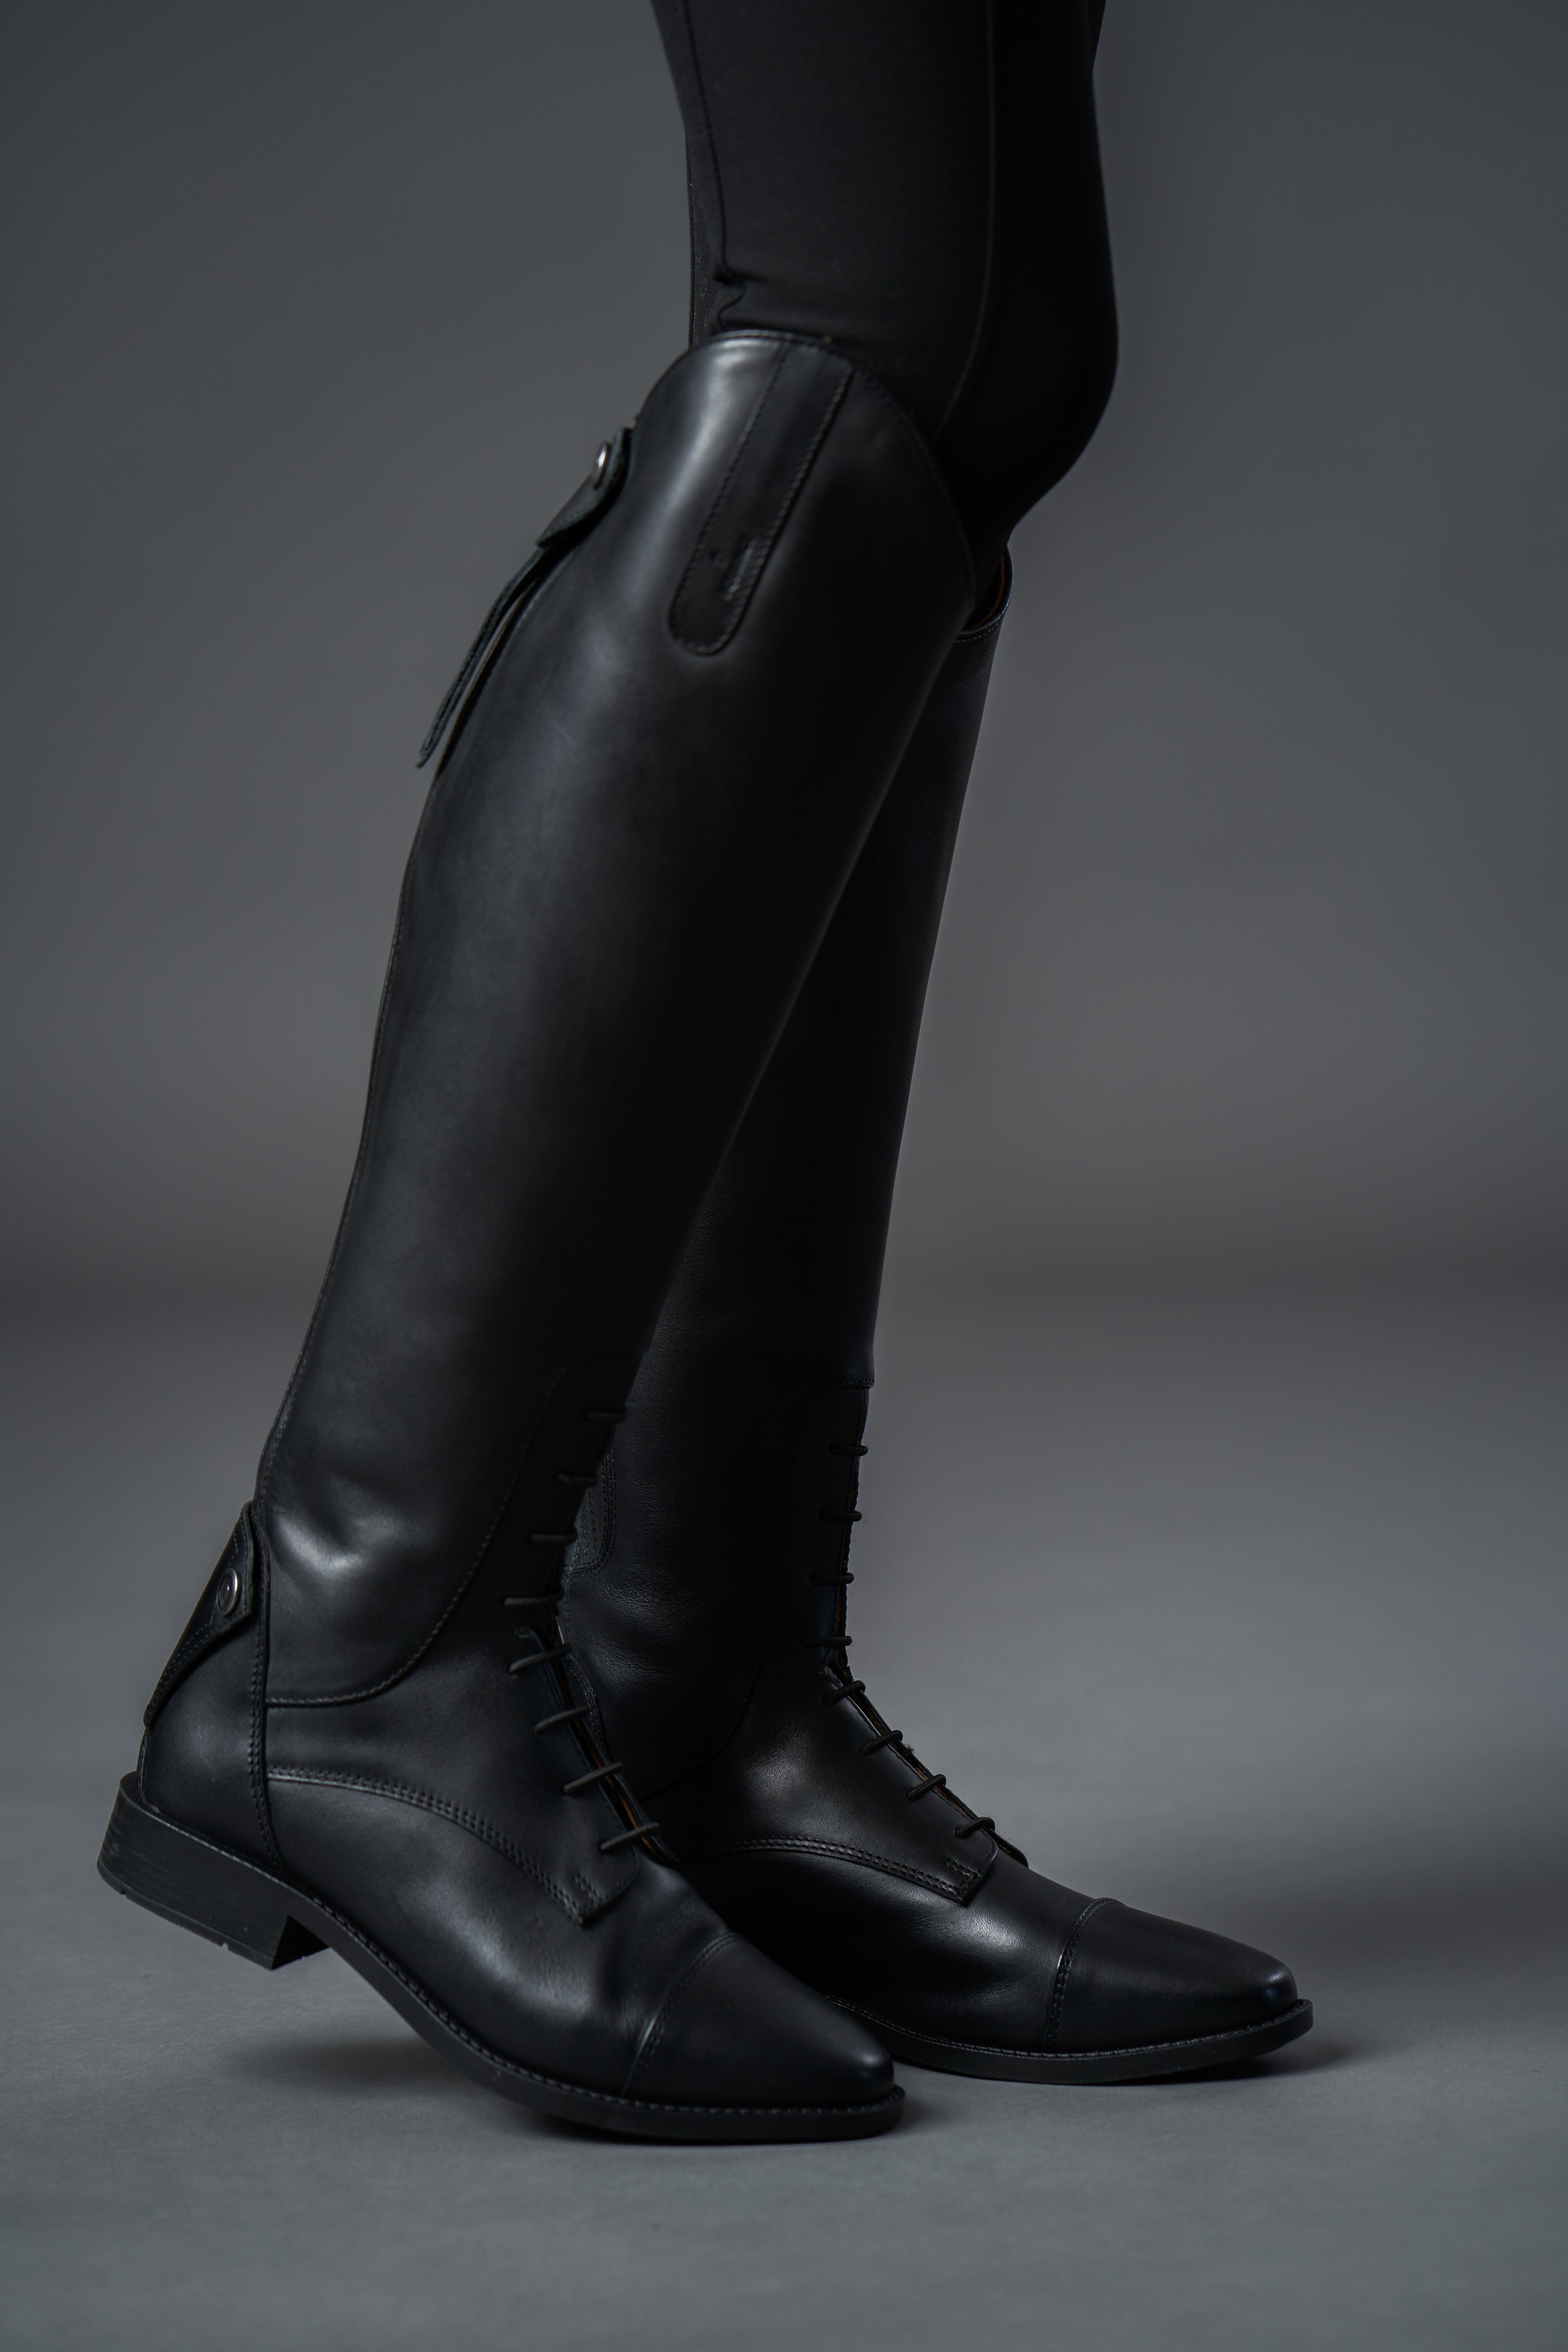 Equipage Megan W Riding Boots - Black (42)